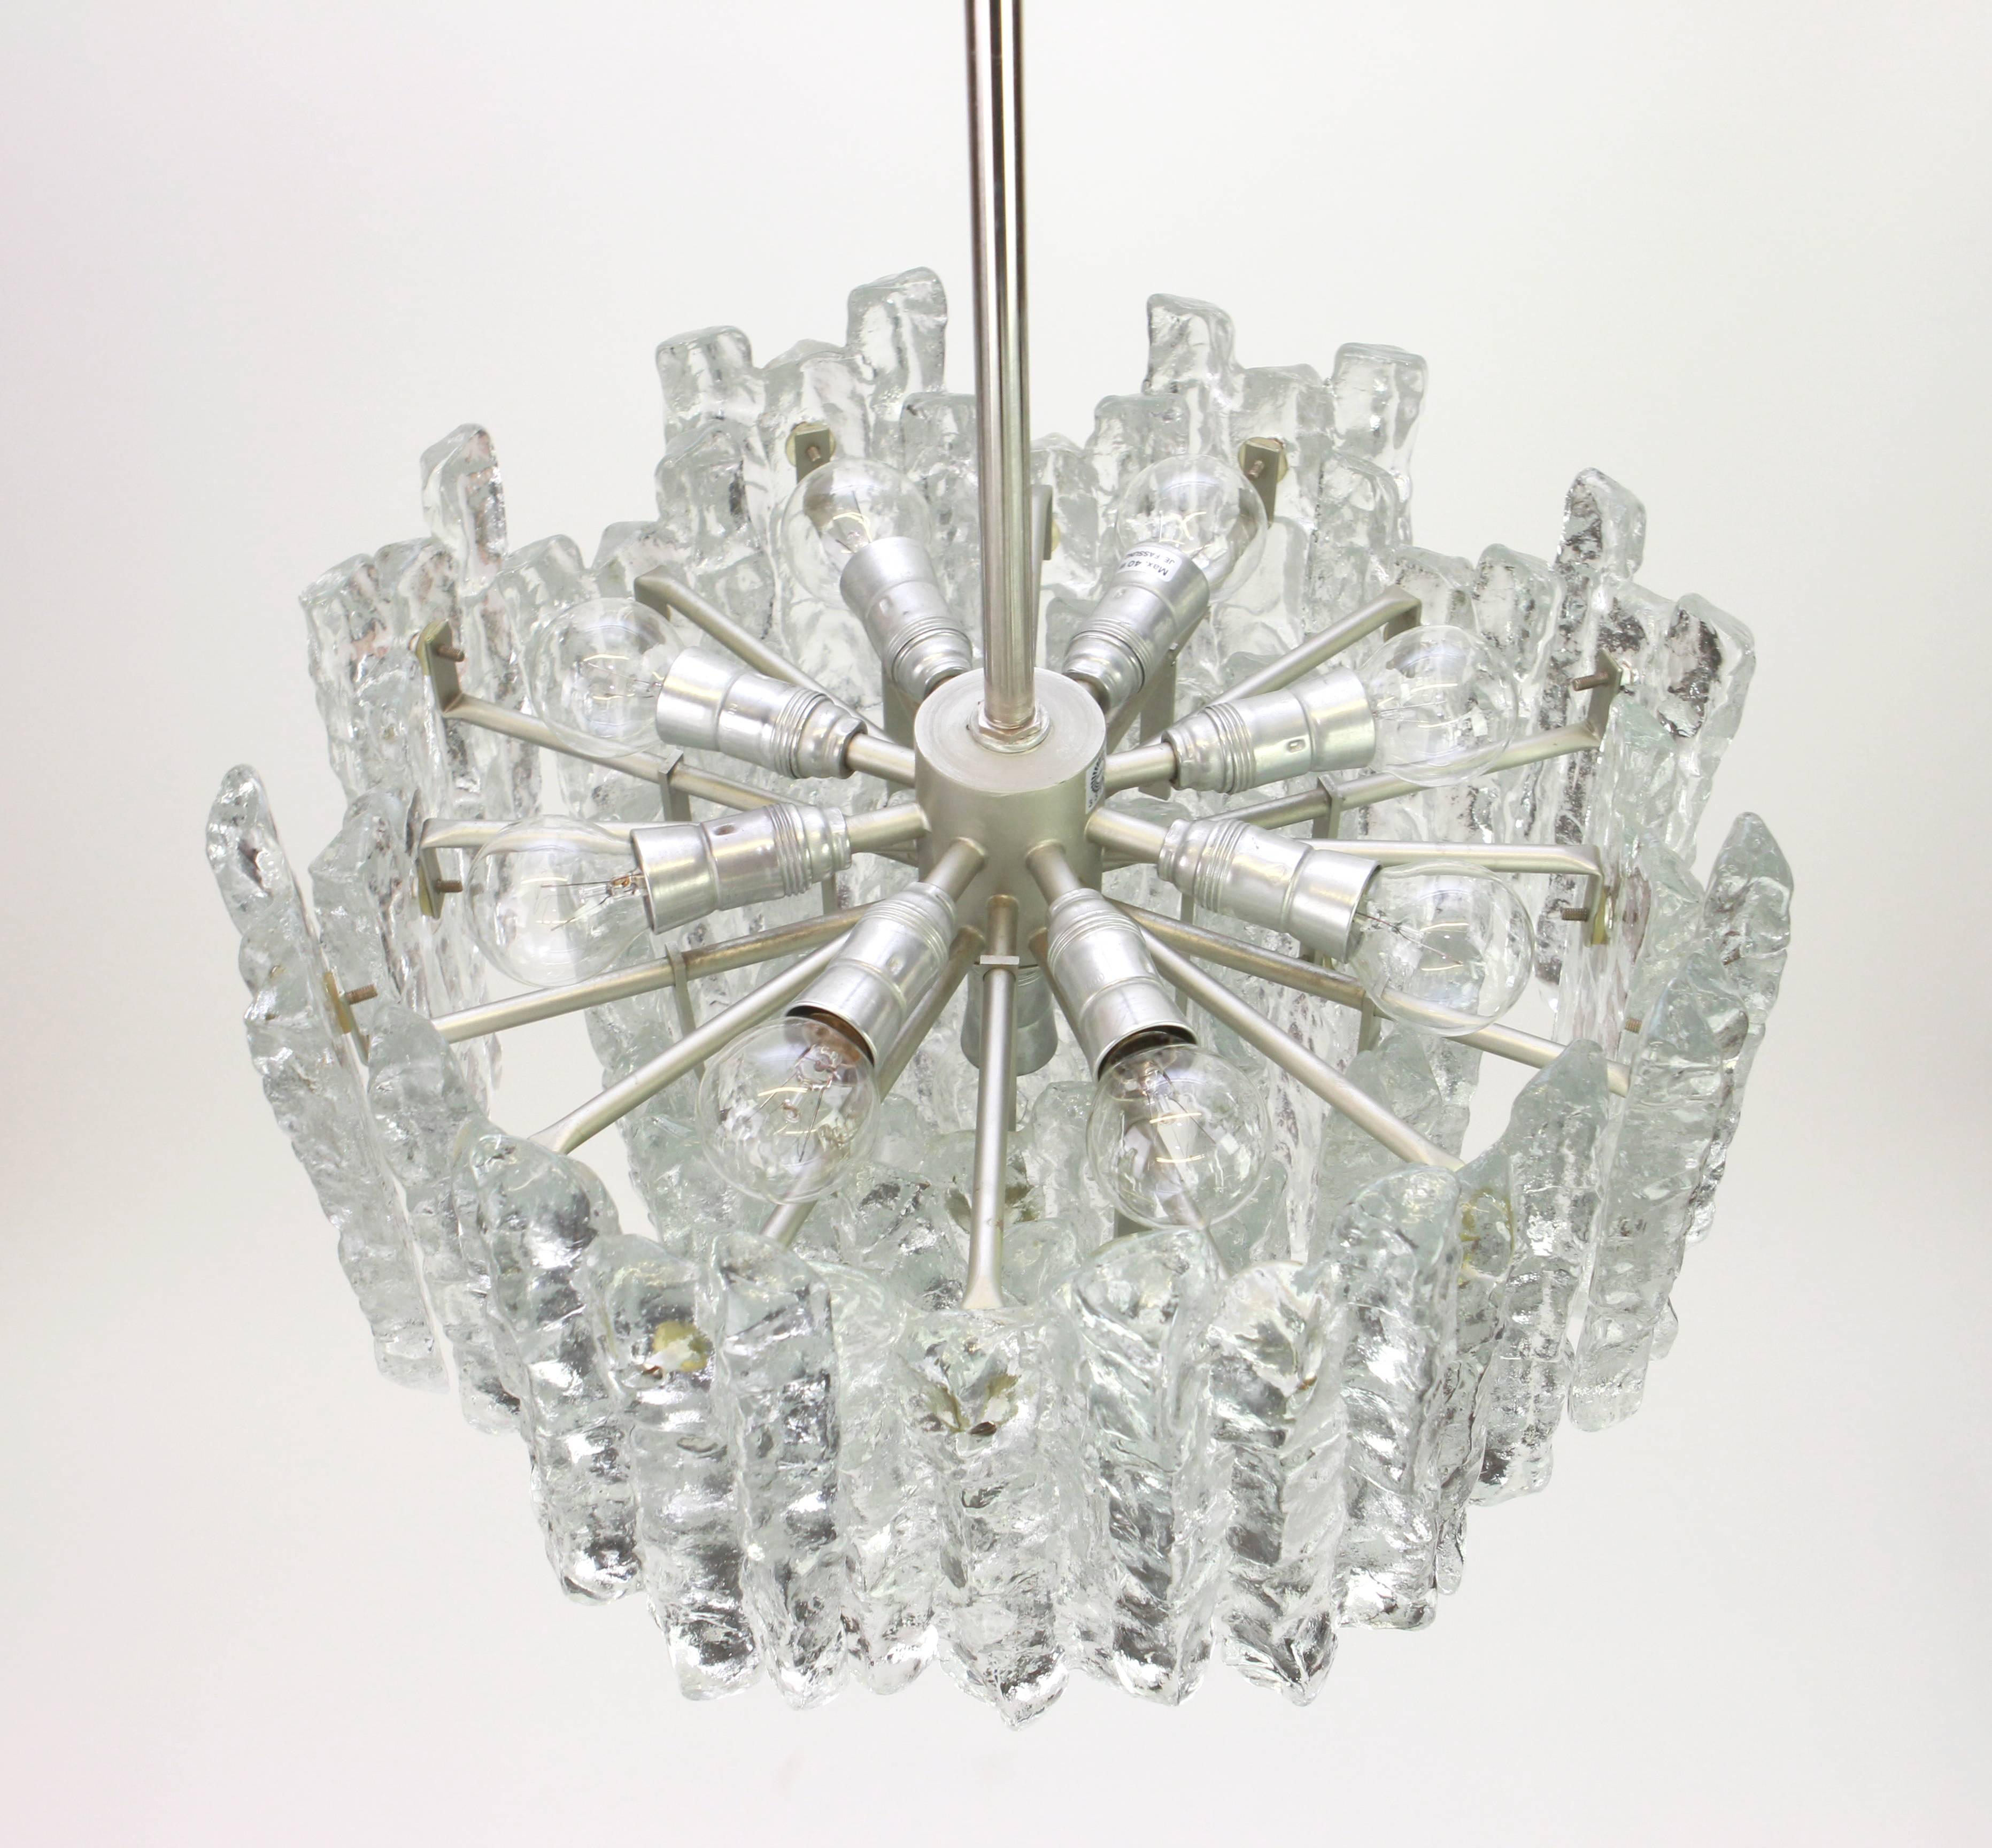 1 of 2 Large Murano Ice Glass Chandelier by Kalmar, Austria, 1960s For Sale 1